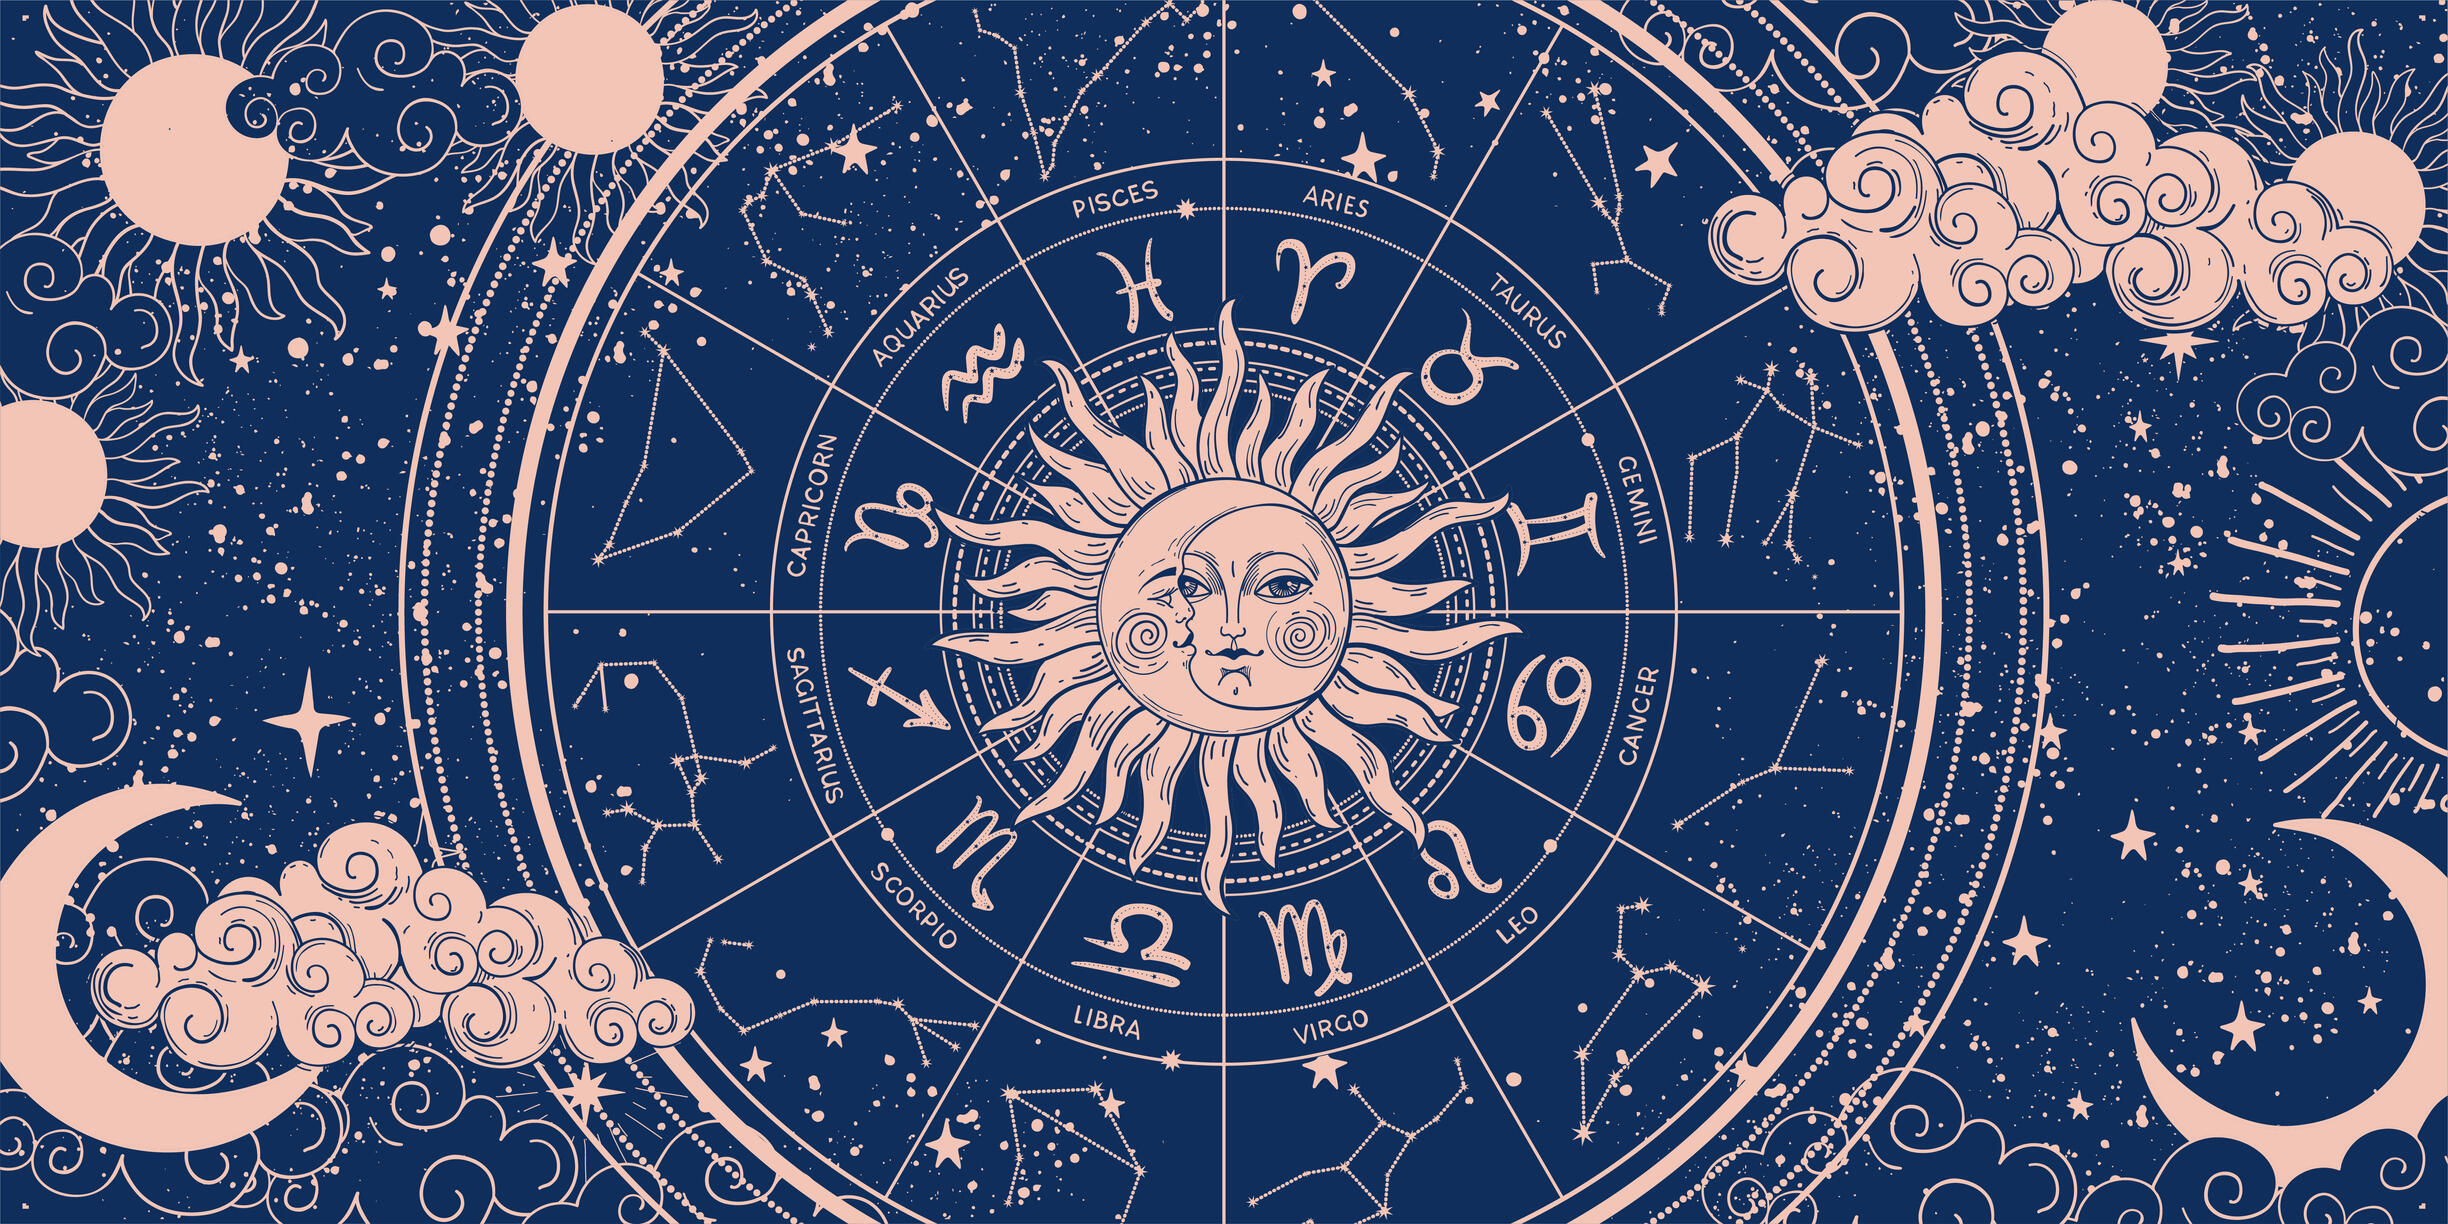 Your Daily Horoscope: Here's What's In Store For April 15th